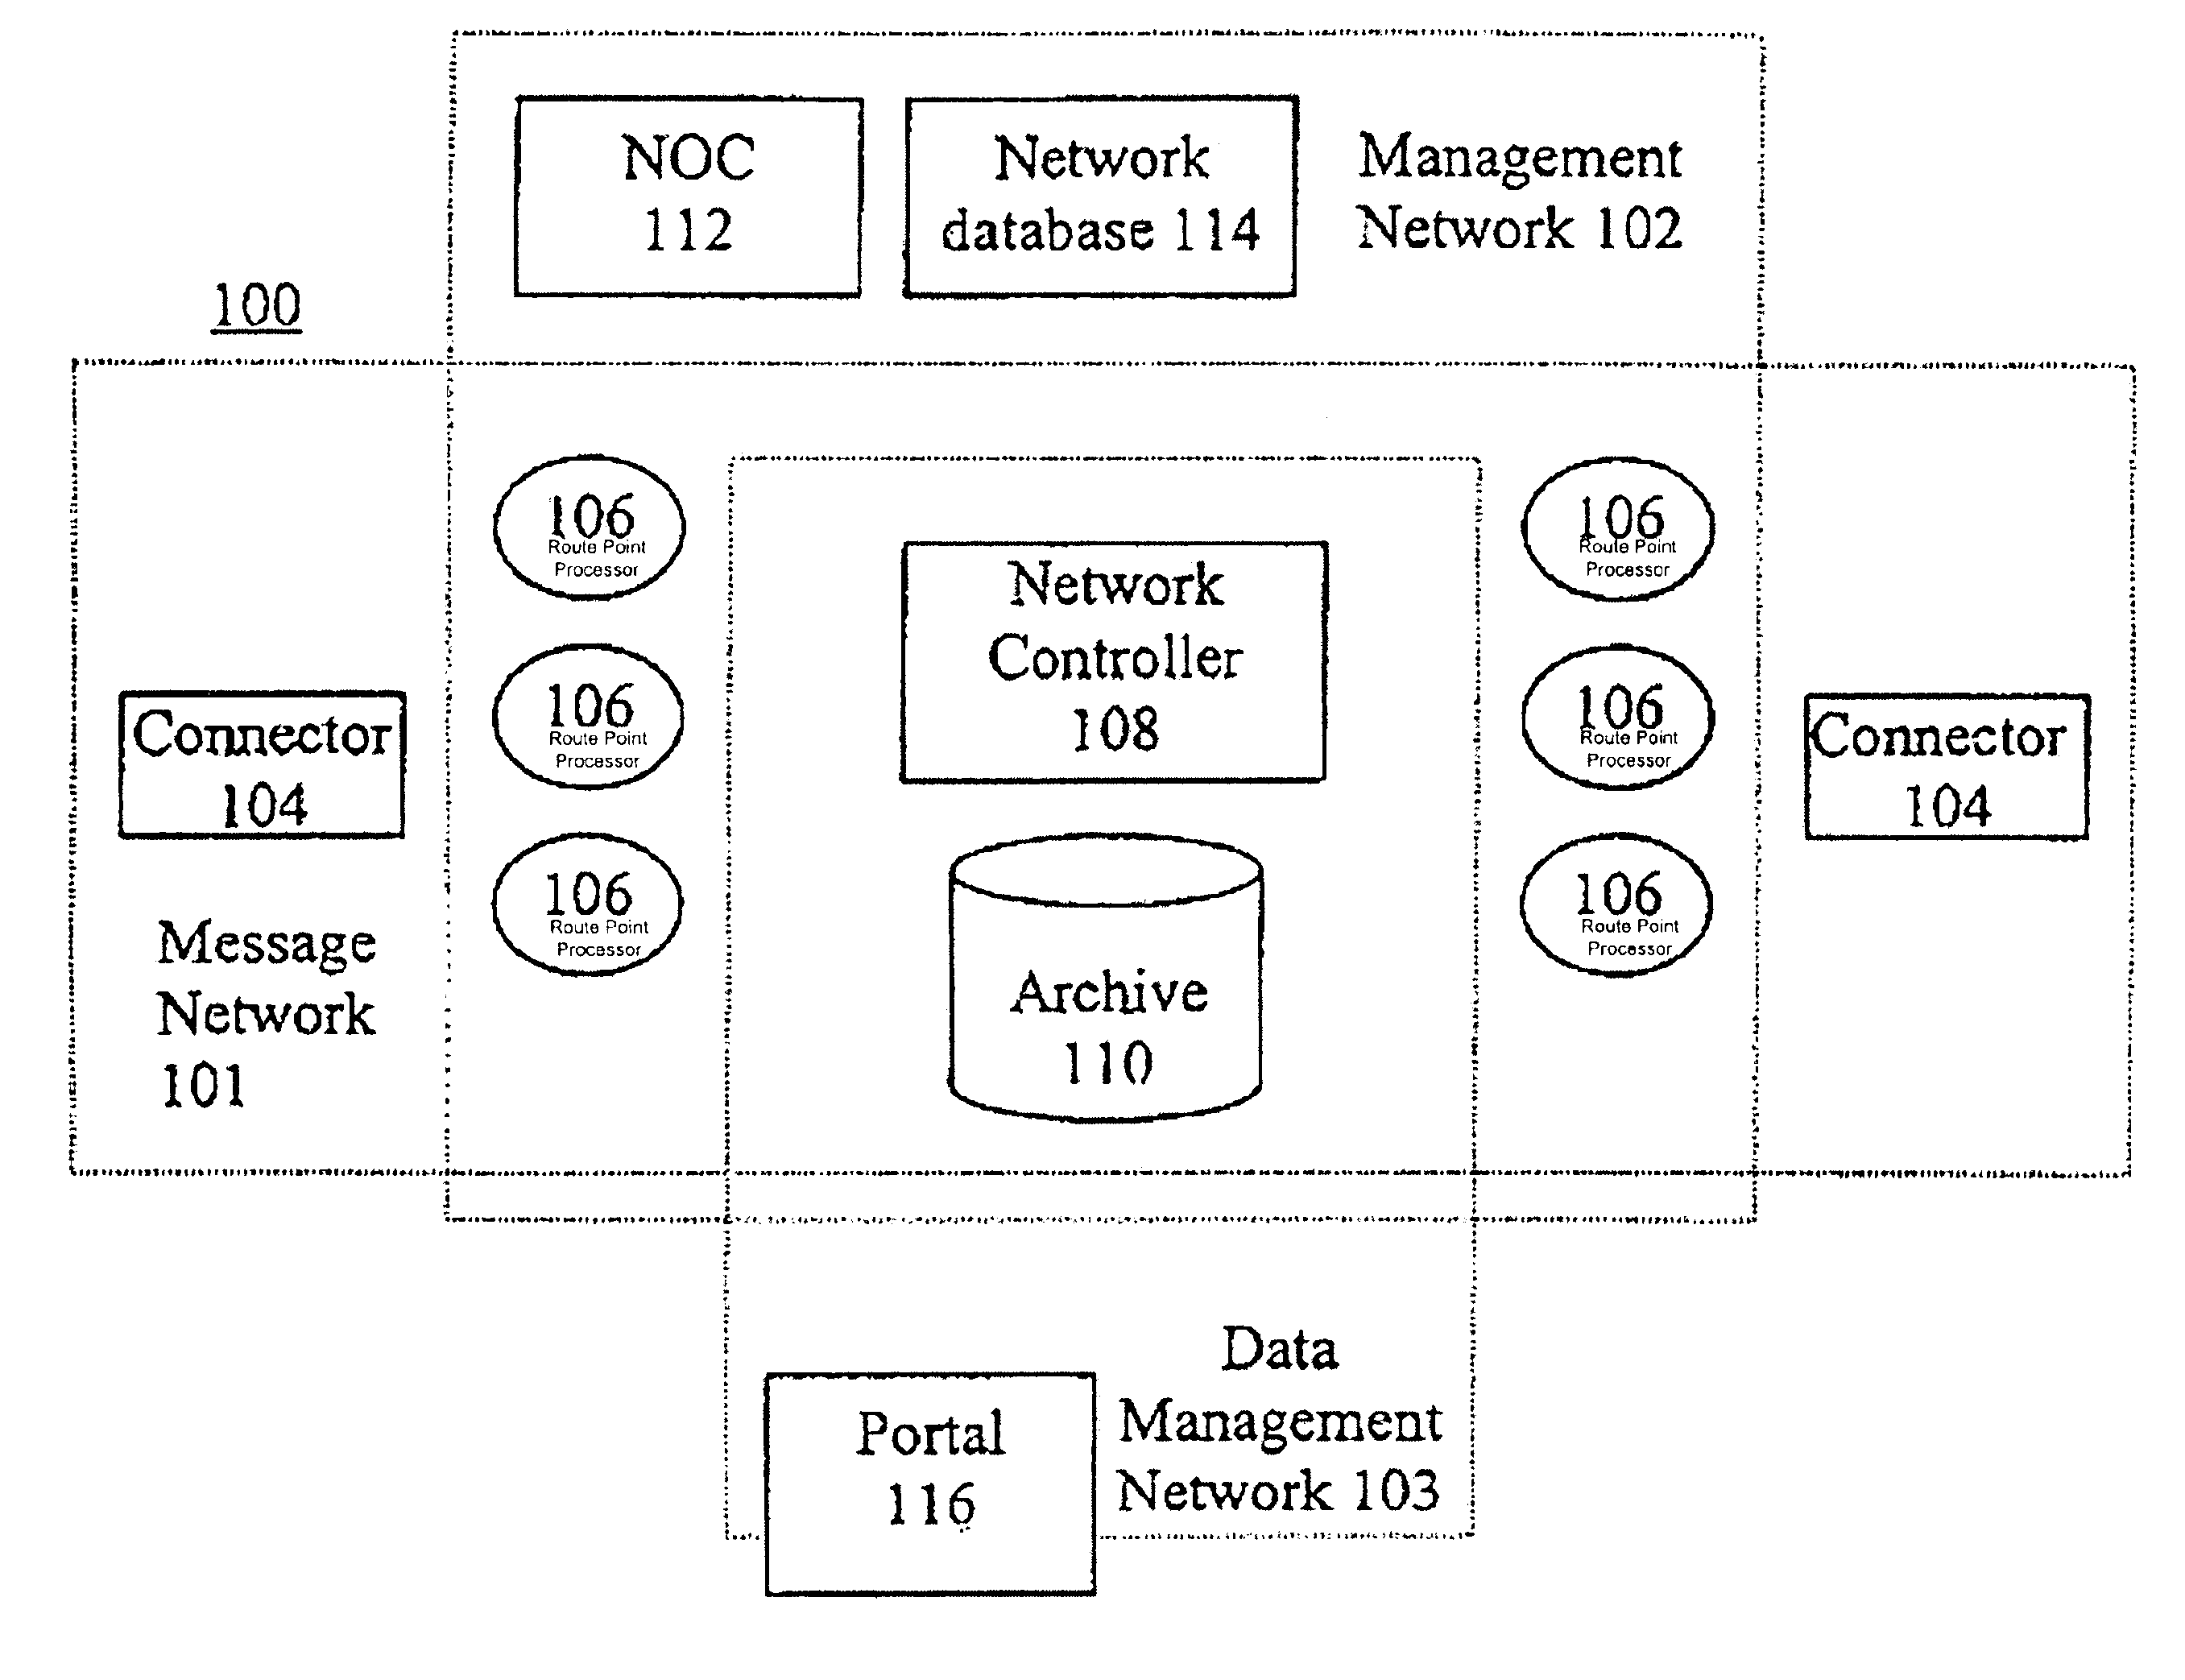 Archival database system for handling information and information transfers in a computer network